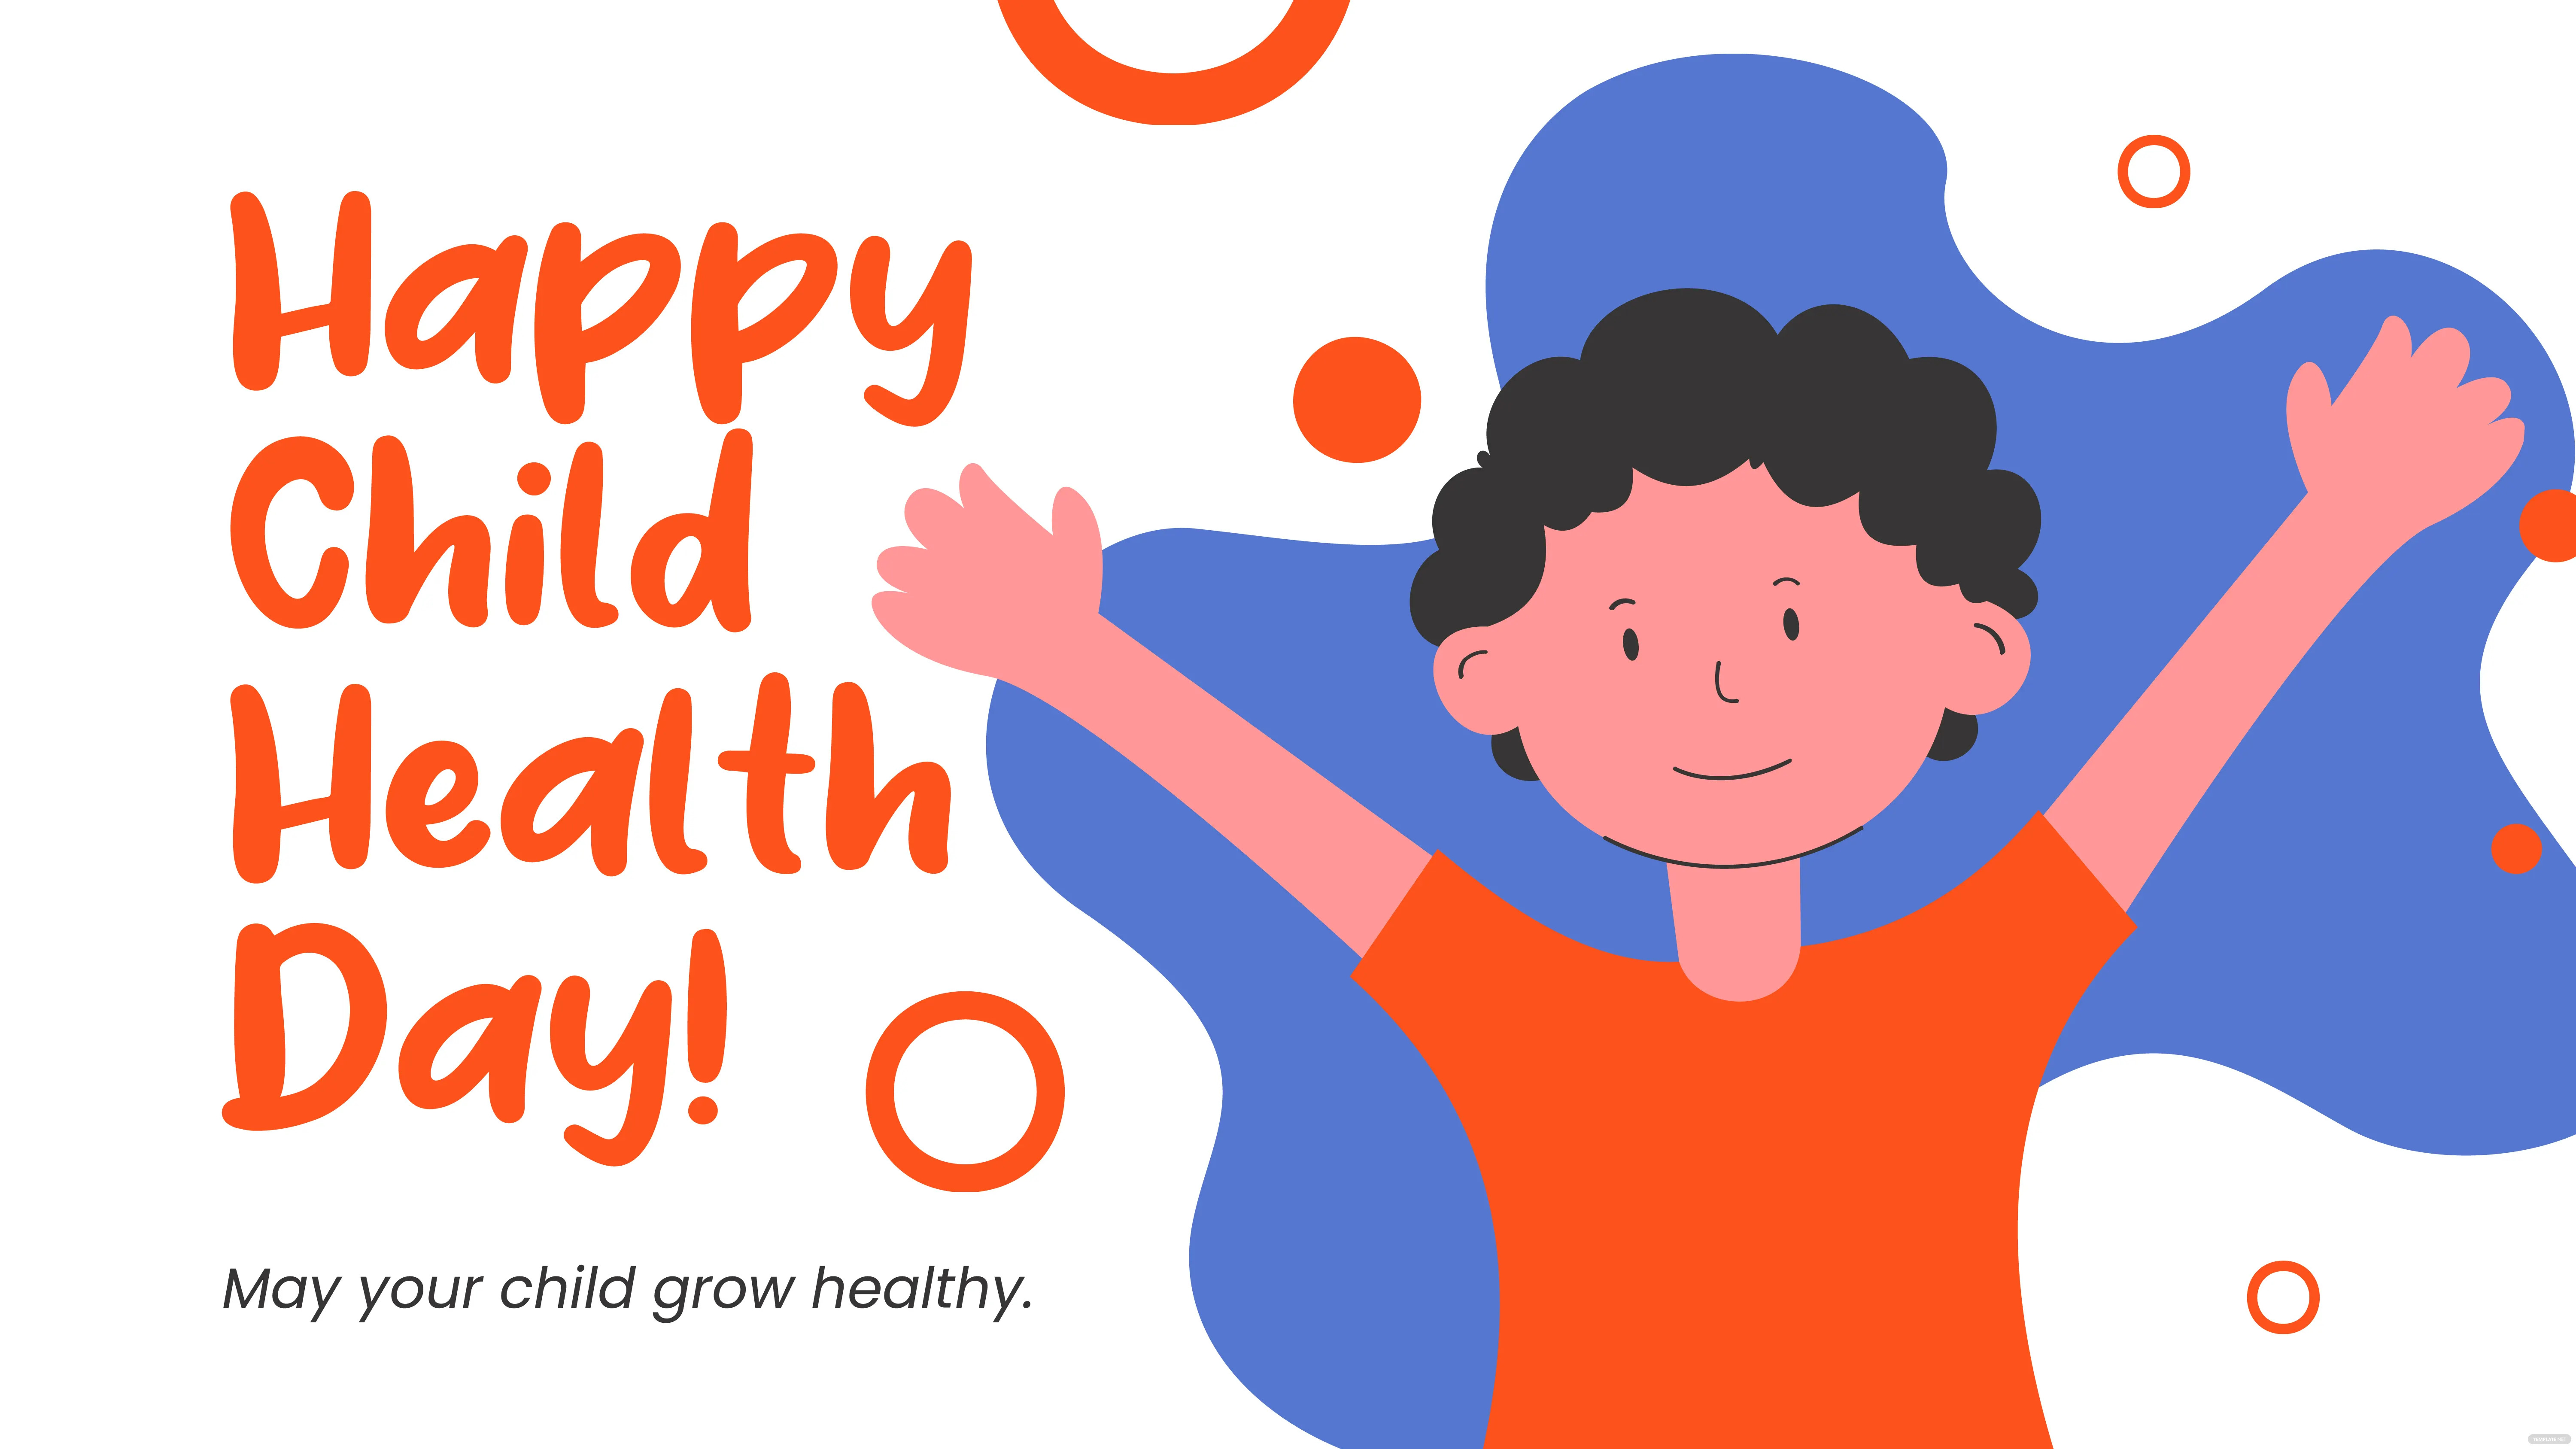 child health day greeting card background ideas examples